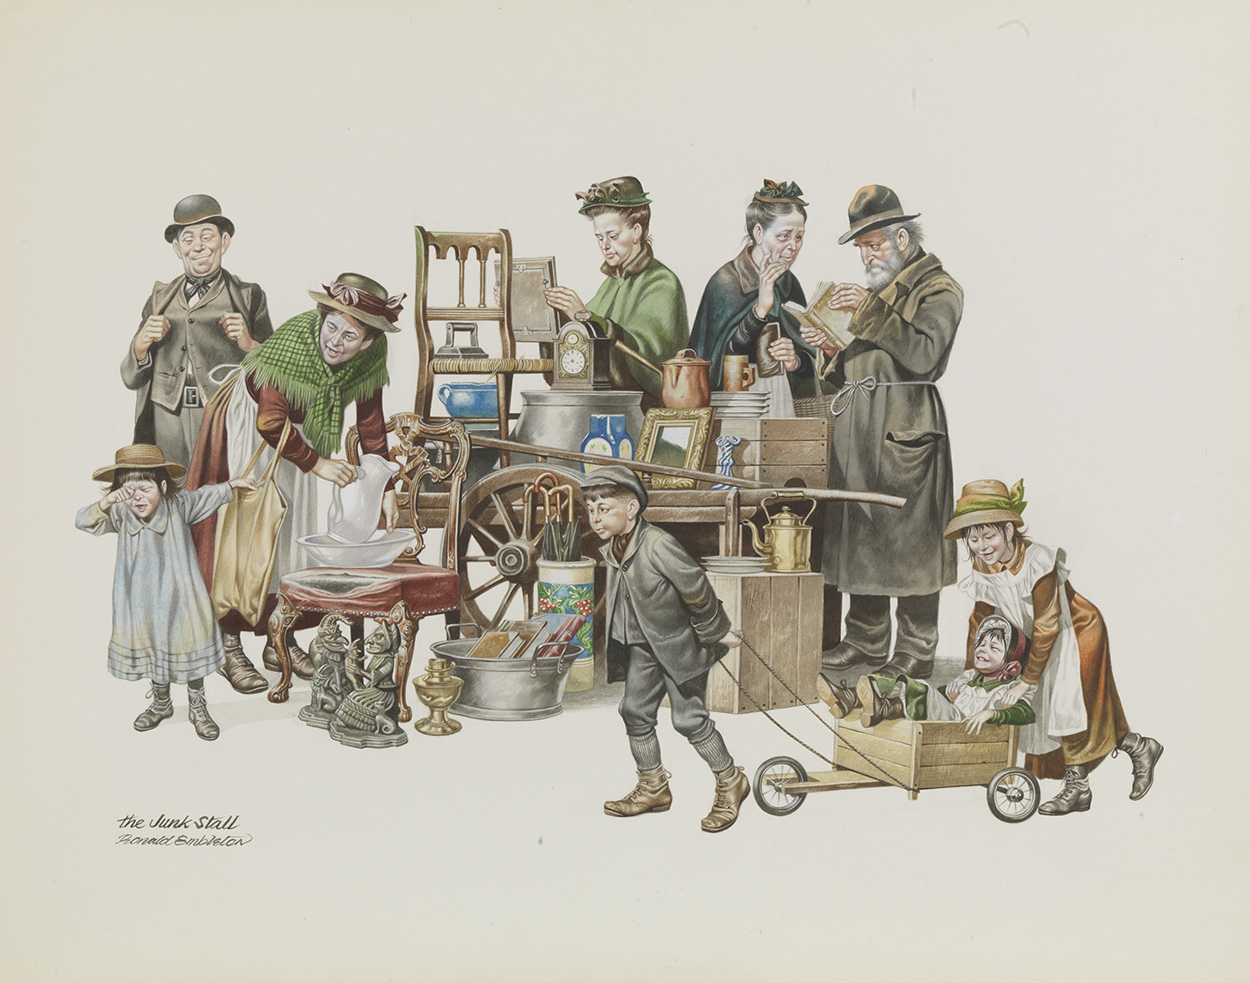 The Junk Stall (Original) (Signed) art by Victorian and Edwardian Britain (Ron Embleton) at The Illustration Art Gallery